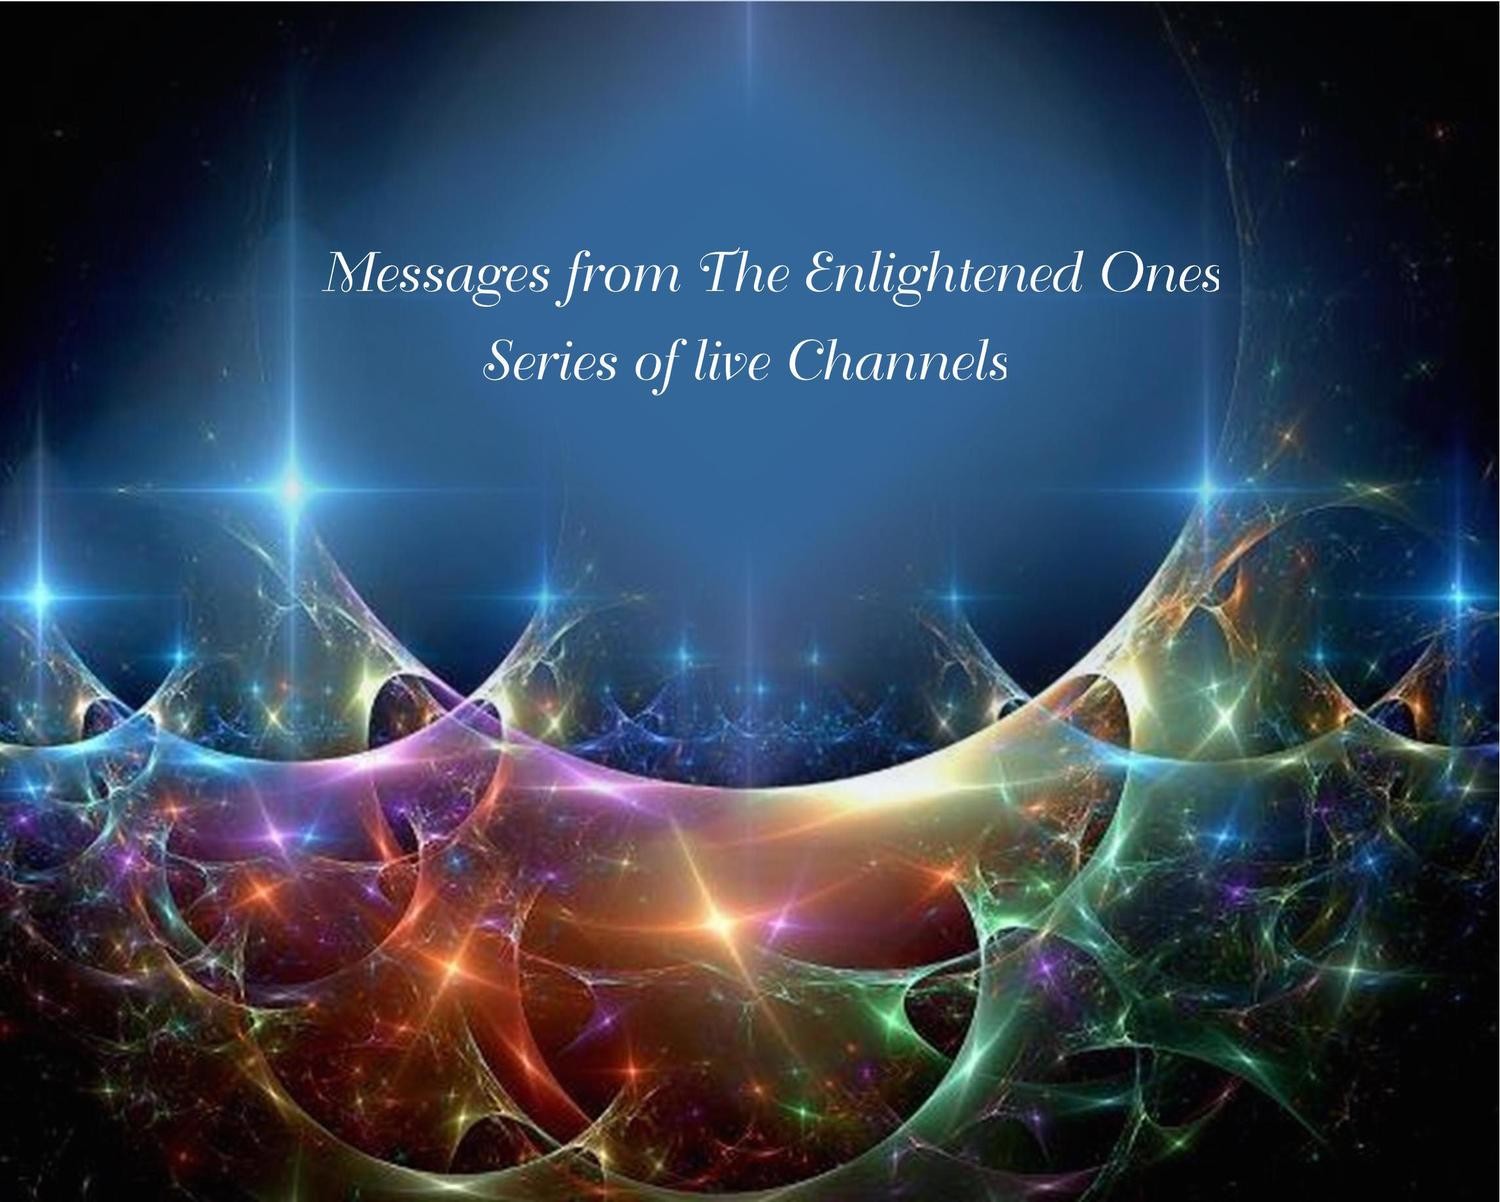 Any 6 Messages from The Enlightened Ones